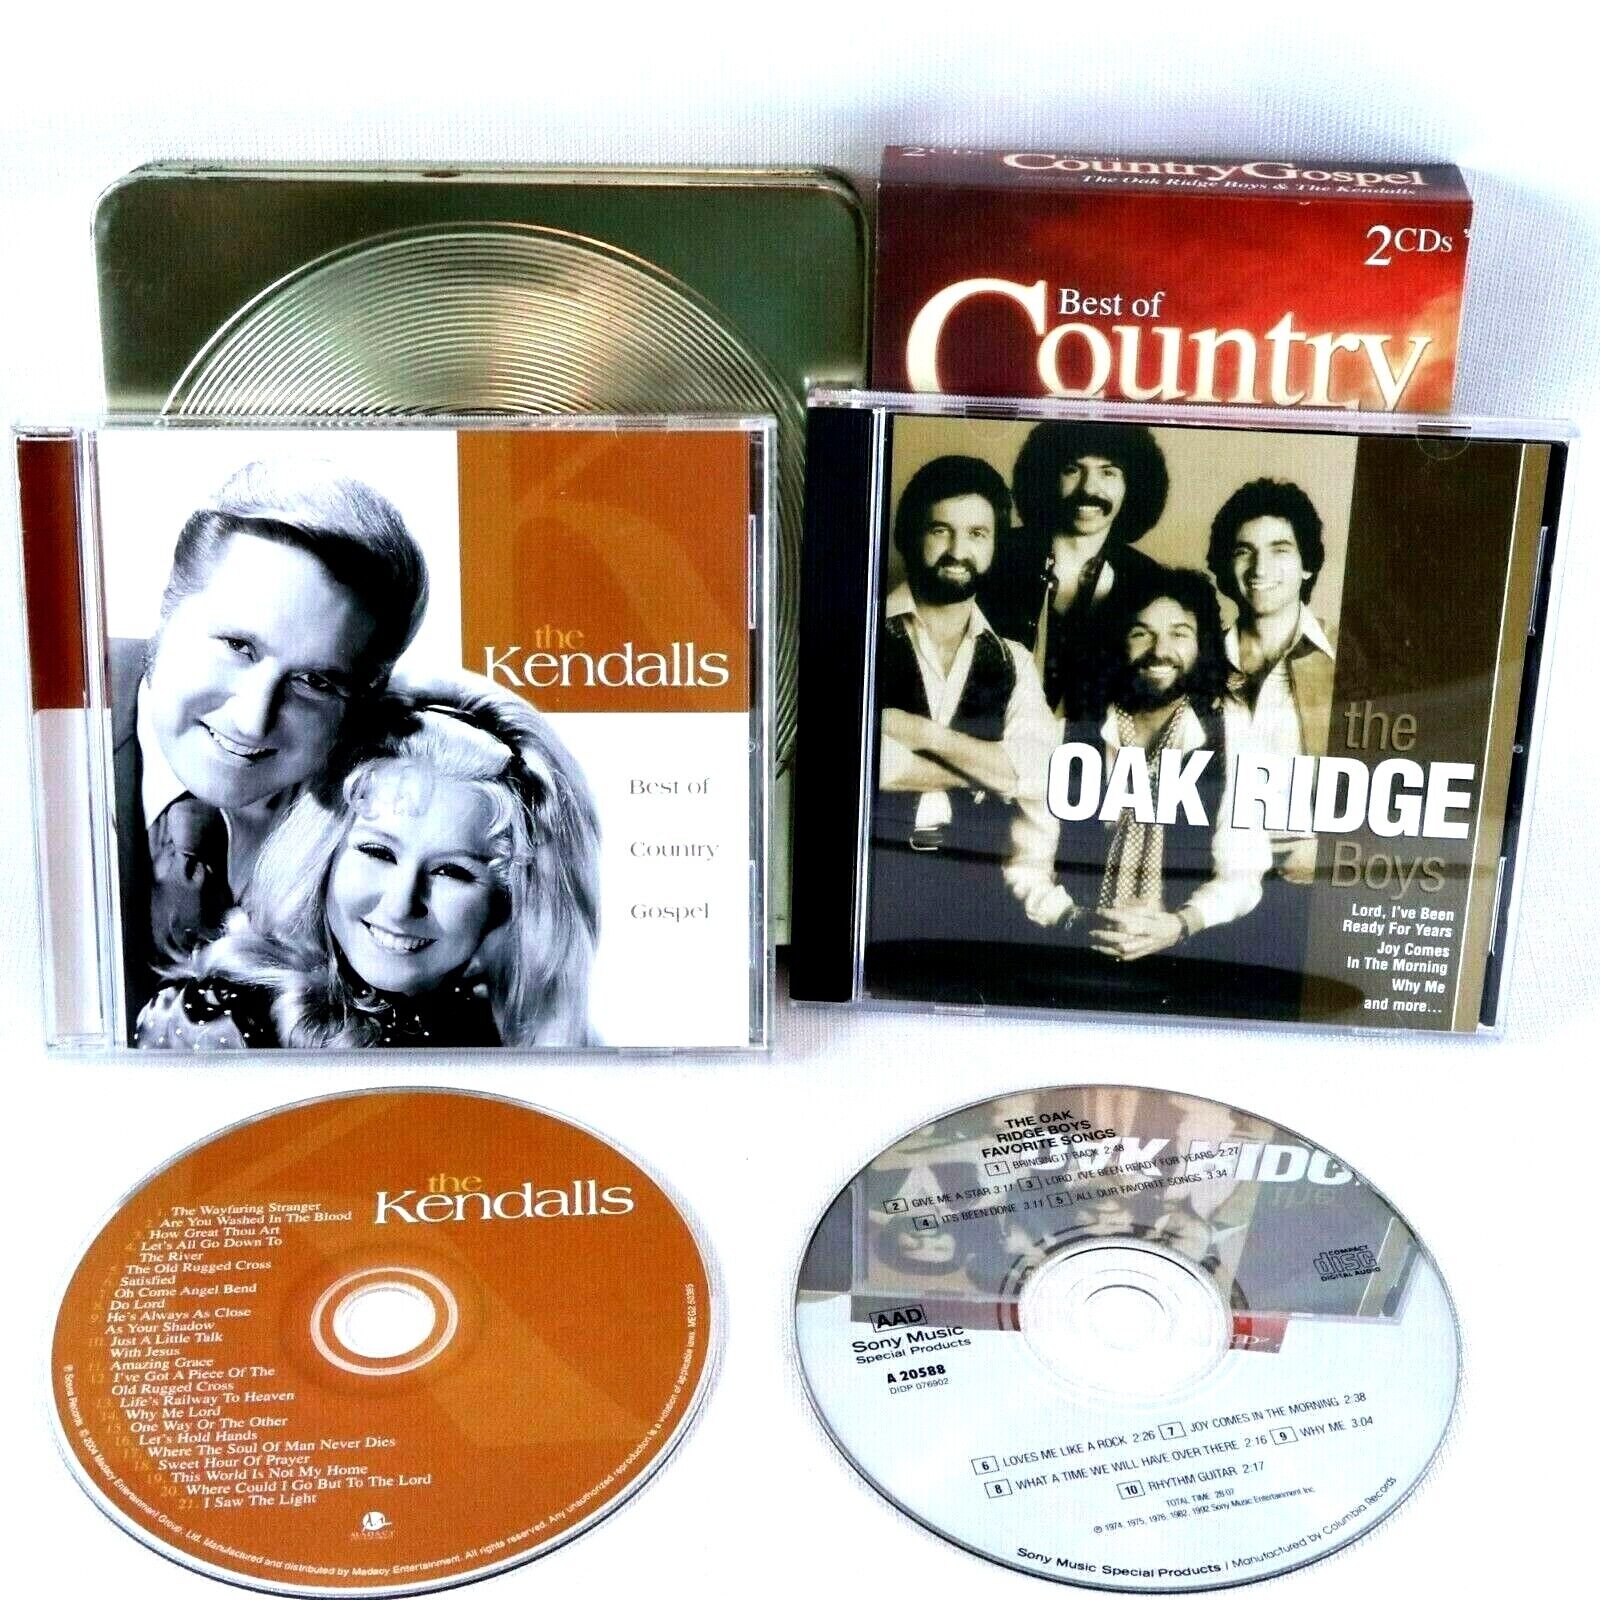 Best of Country GOSPEL 2 CDs The Oak Ridge Boys and The Kendalls Boxed Set Faith